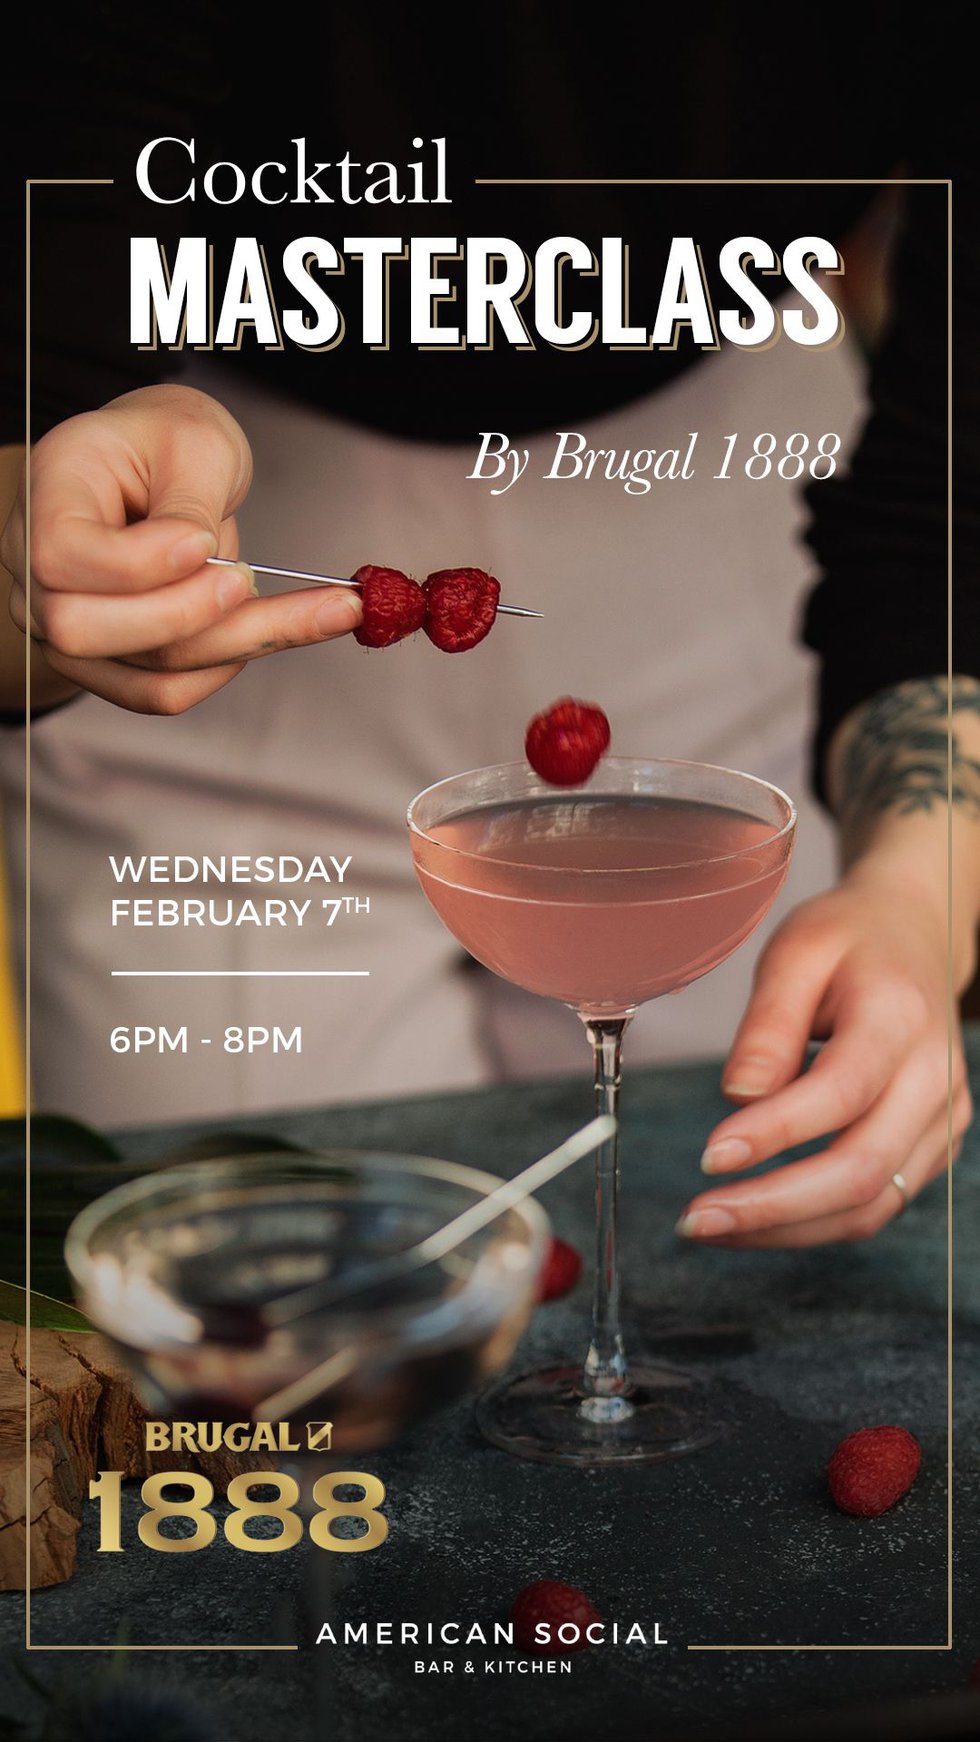 AmSo Cocktail Masterclass by Brugal 1888.jpeg